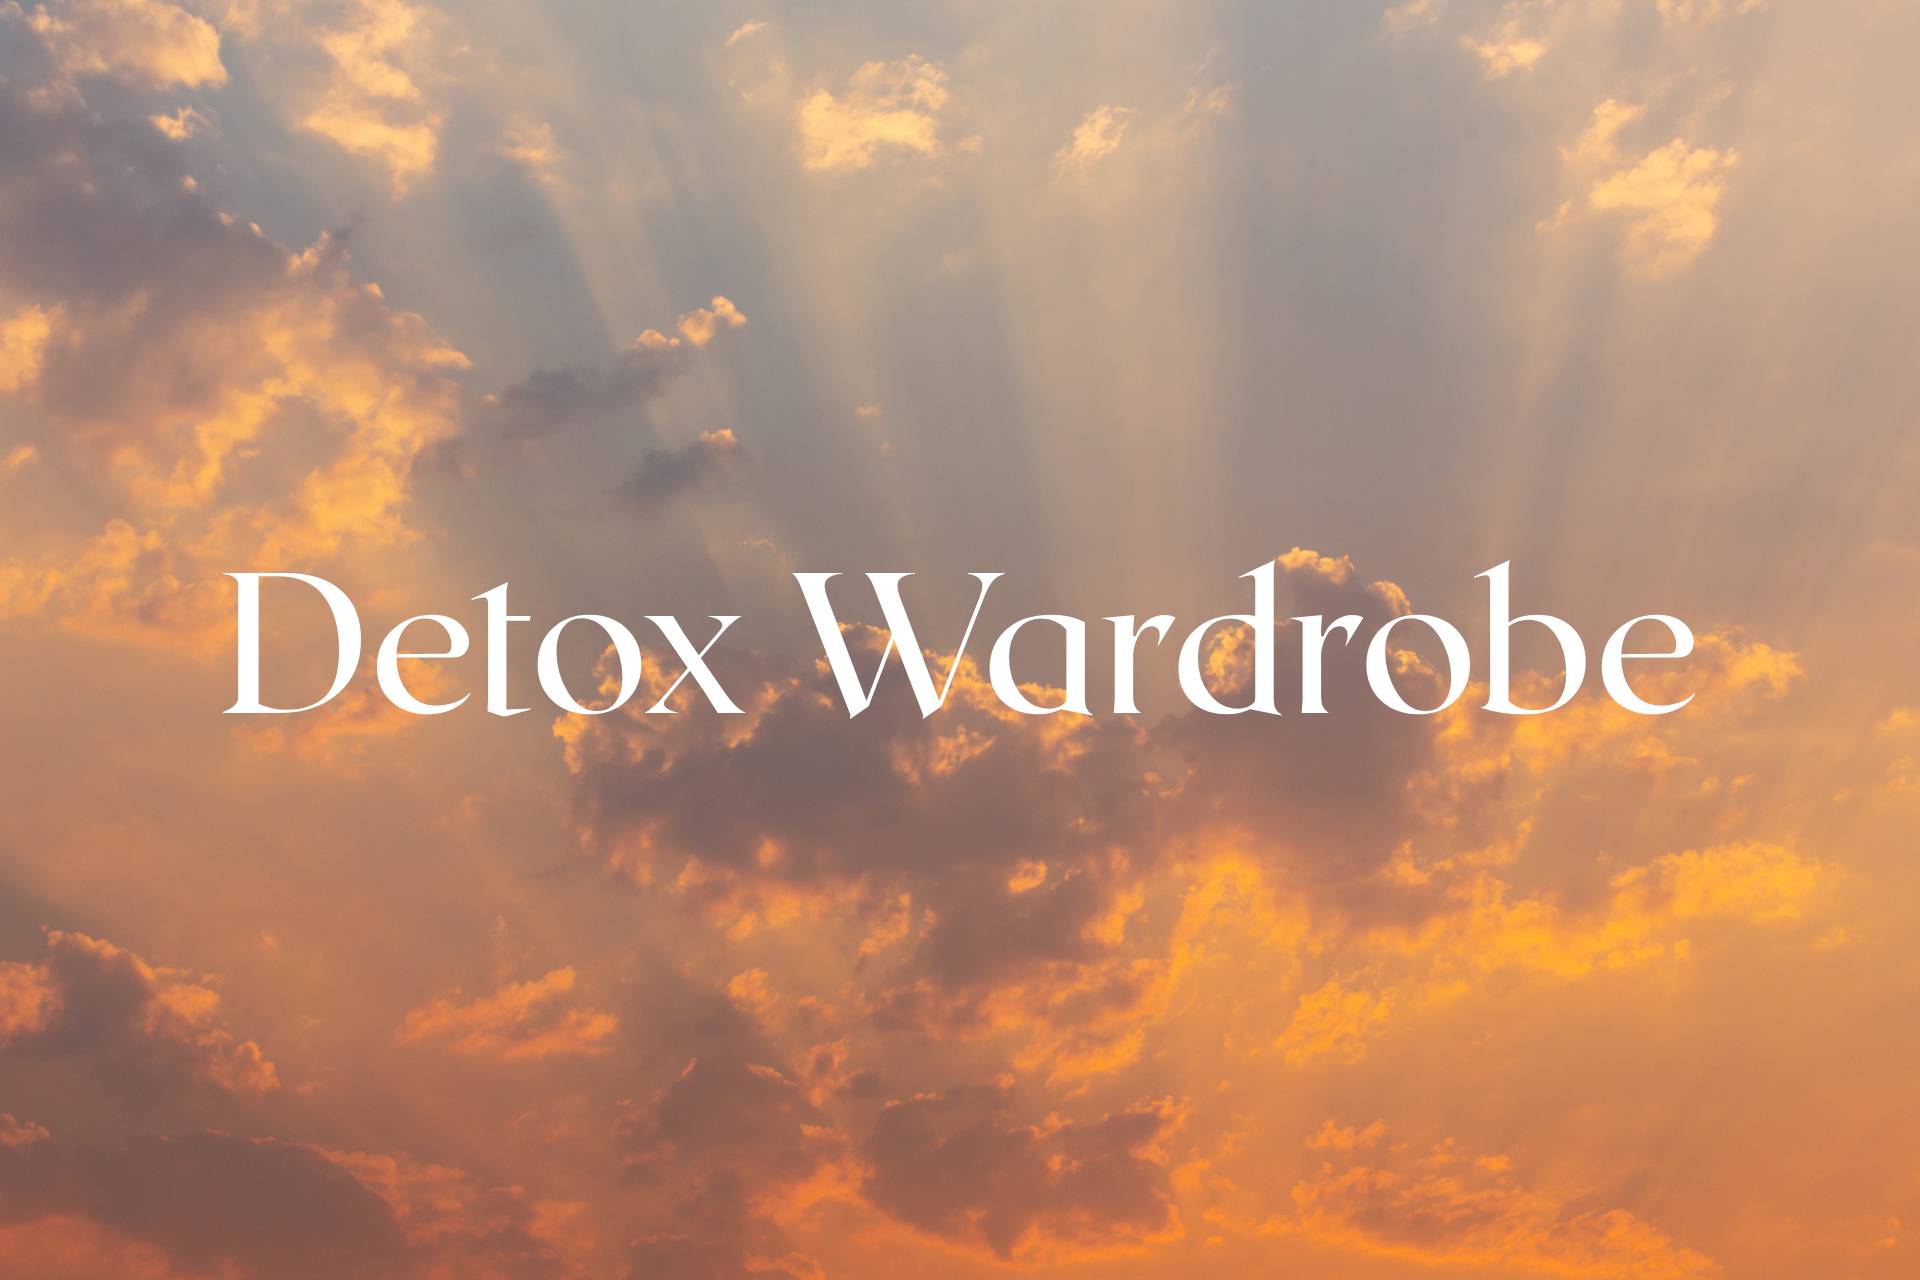 Detox your wardrobe and upgrade your style